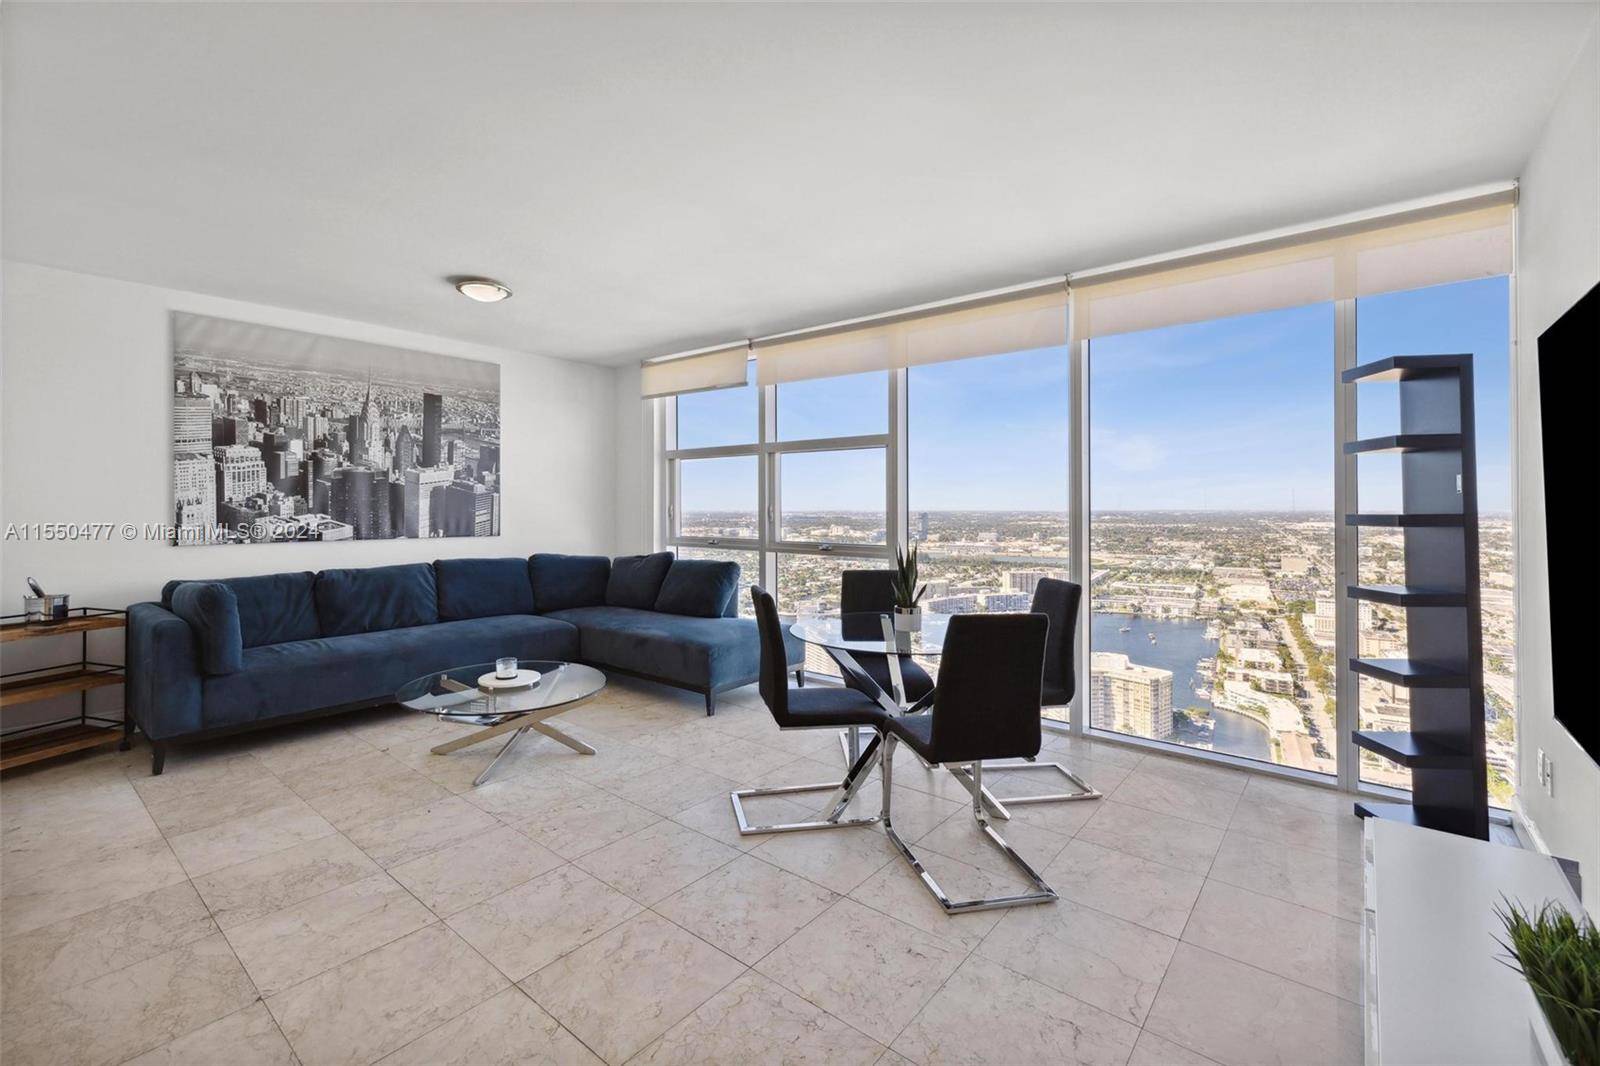 This stunning 1 bedroom, 1 bathroom unit, Model F, offers breathtaking city and Intracoastal views, with marble floors throughout.